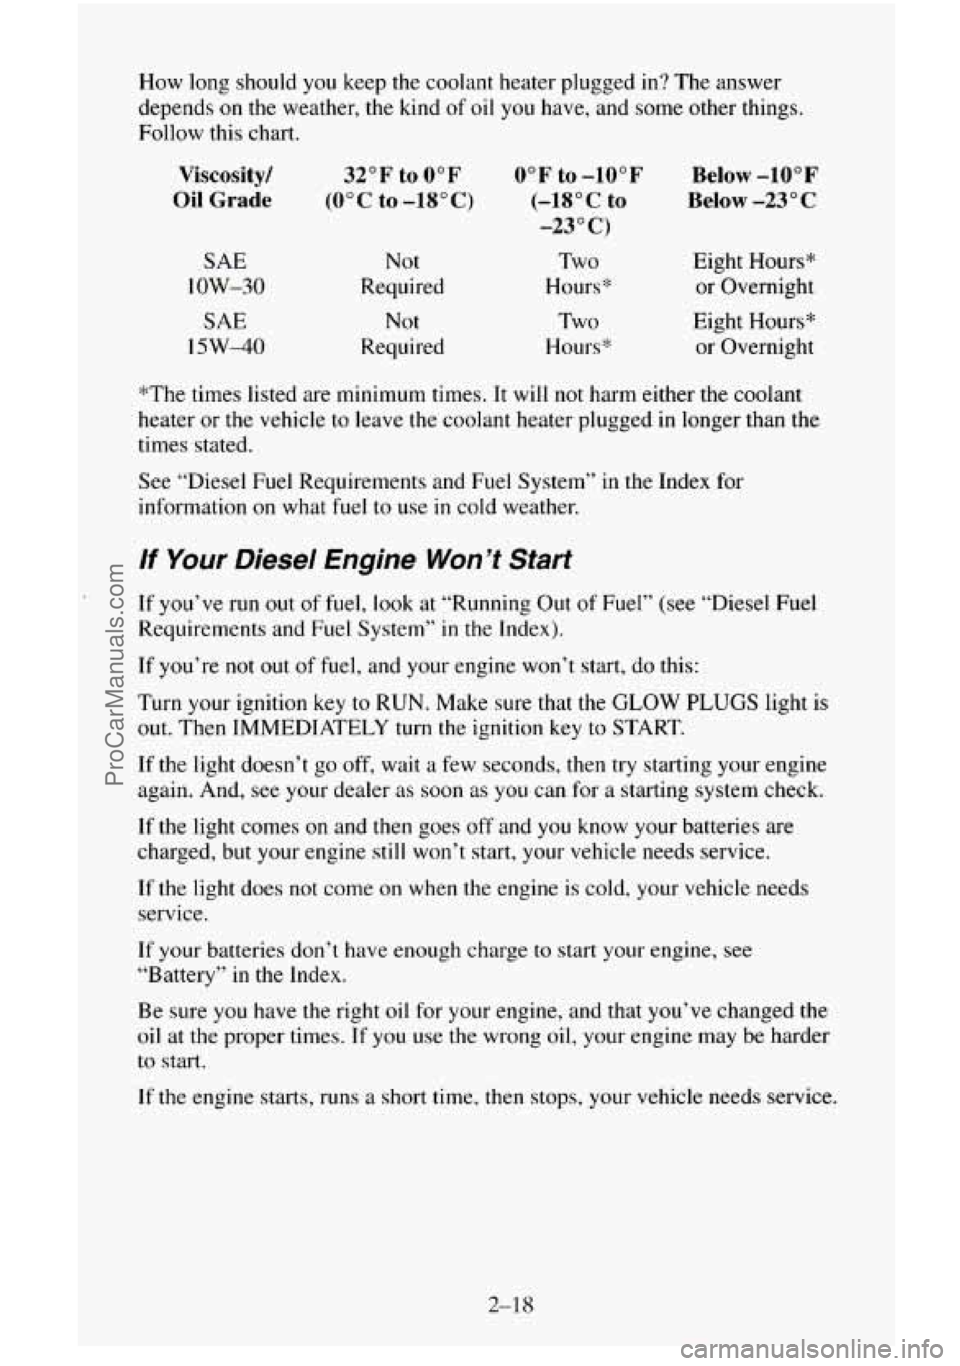 CHEVROLET SUBURBAN 1996  Owners Manual How long should  you keep the coolant  heater plugged  in?  The answer 
depends 
on the weather, the kind  of oil you have, and some  other things. 
Follow this  chart. 
Viscosity/ 
Oil  Grade 
SAE 
l